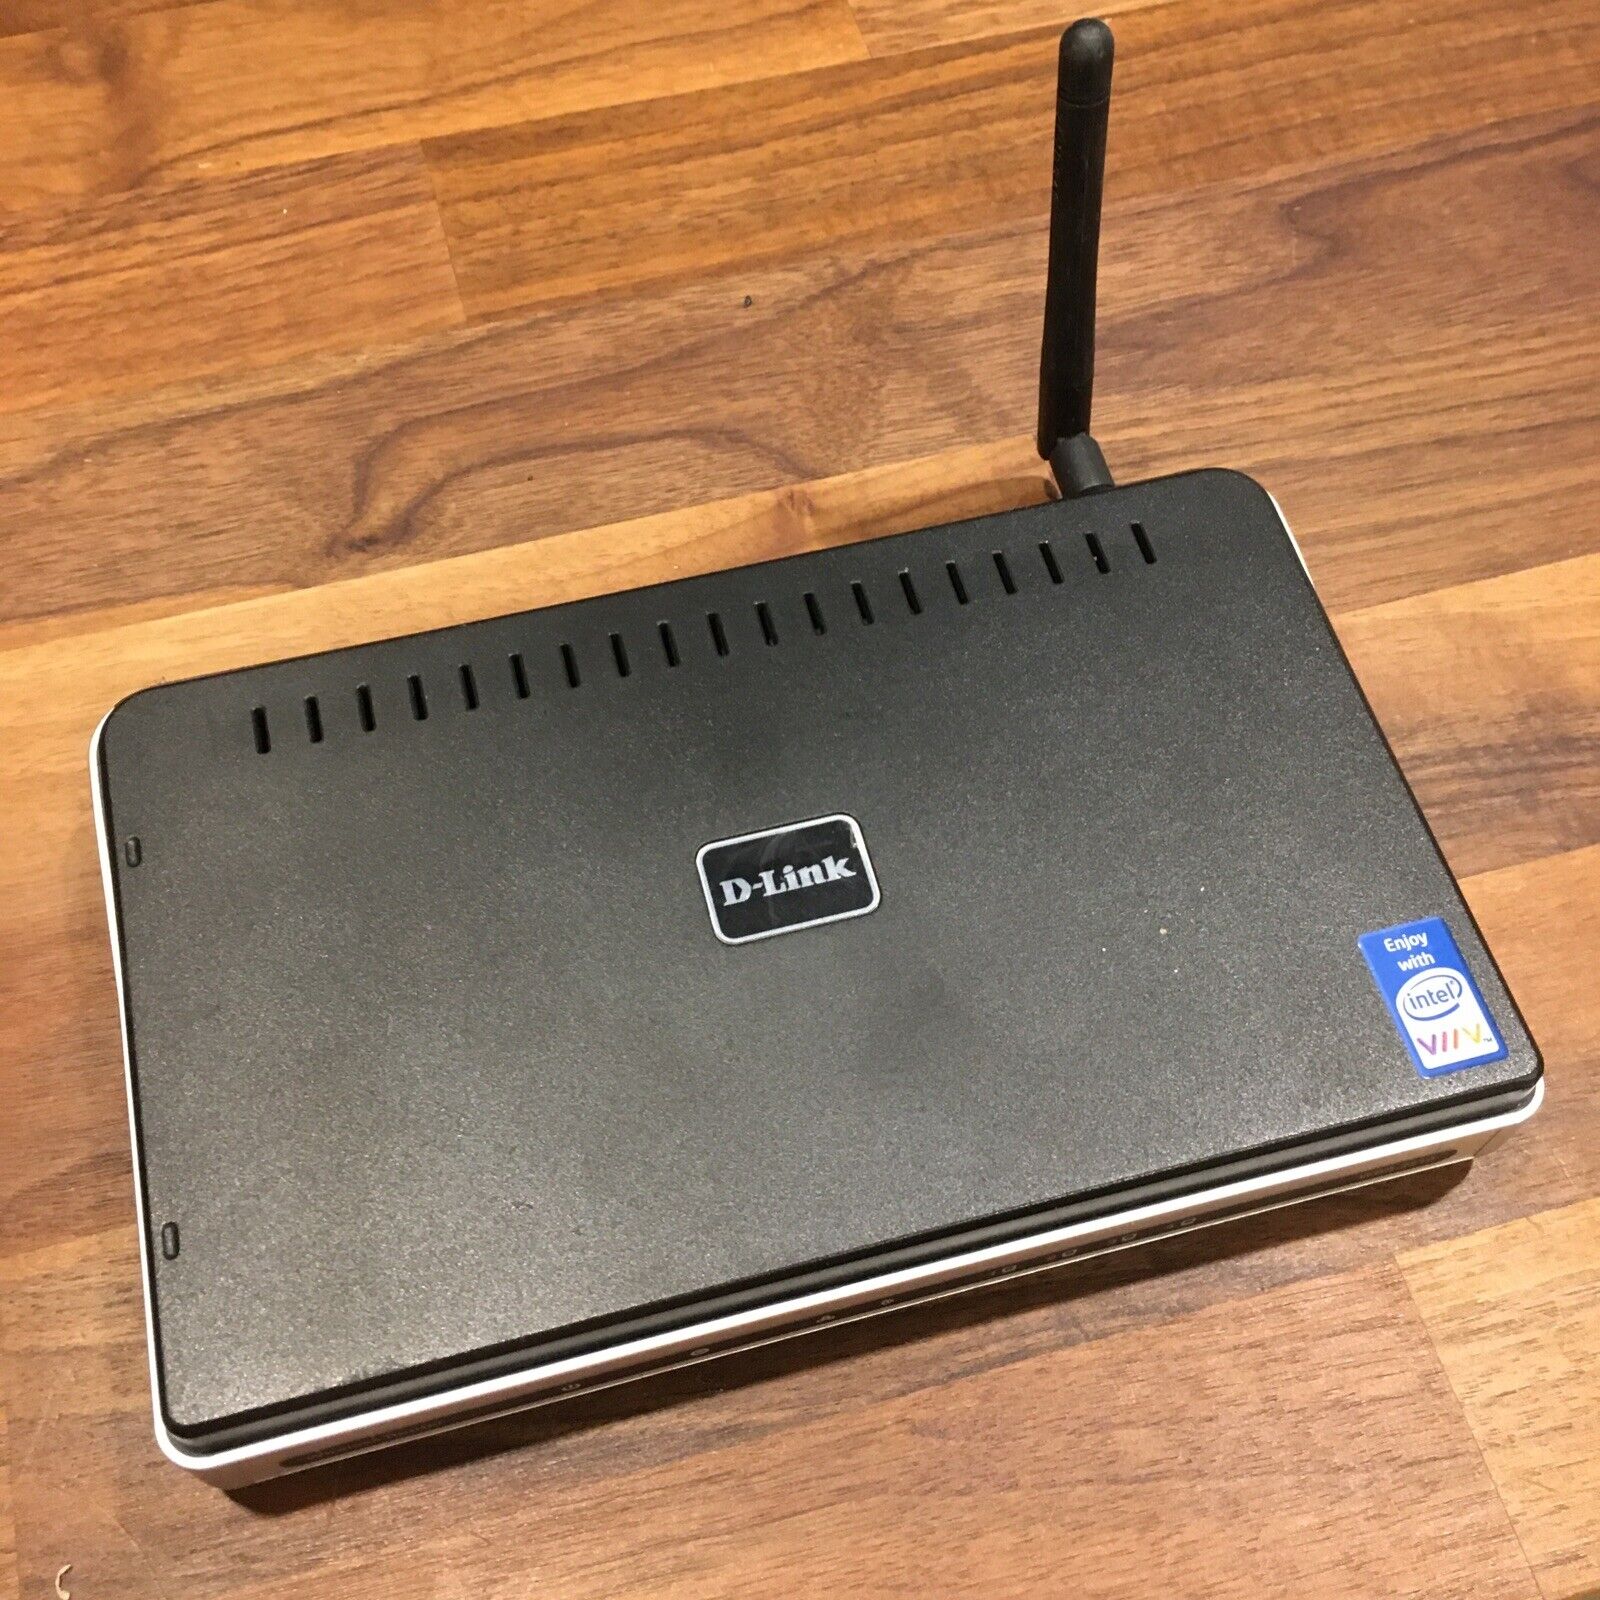 D-Link Router WBR-2310 Intel Wireless Router UNTESTED AS IS NO POWER CABLE